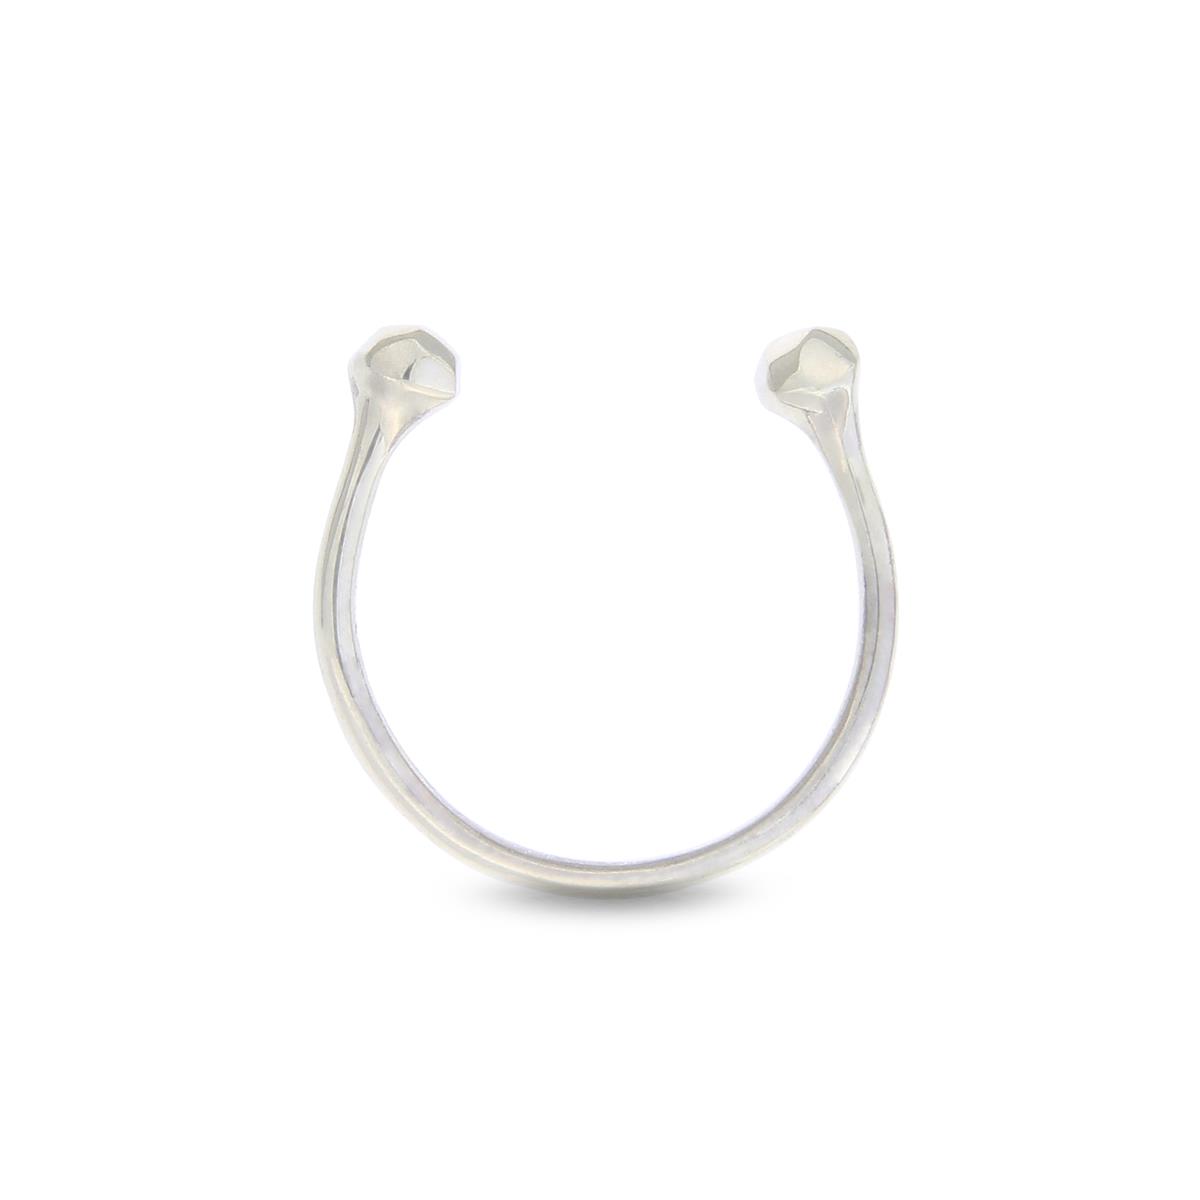 Katie g. Jewellery - Cutting Edge Nugget Ring - XS - Sterling silber poliert - 110€